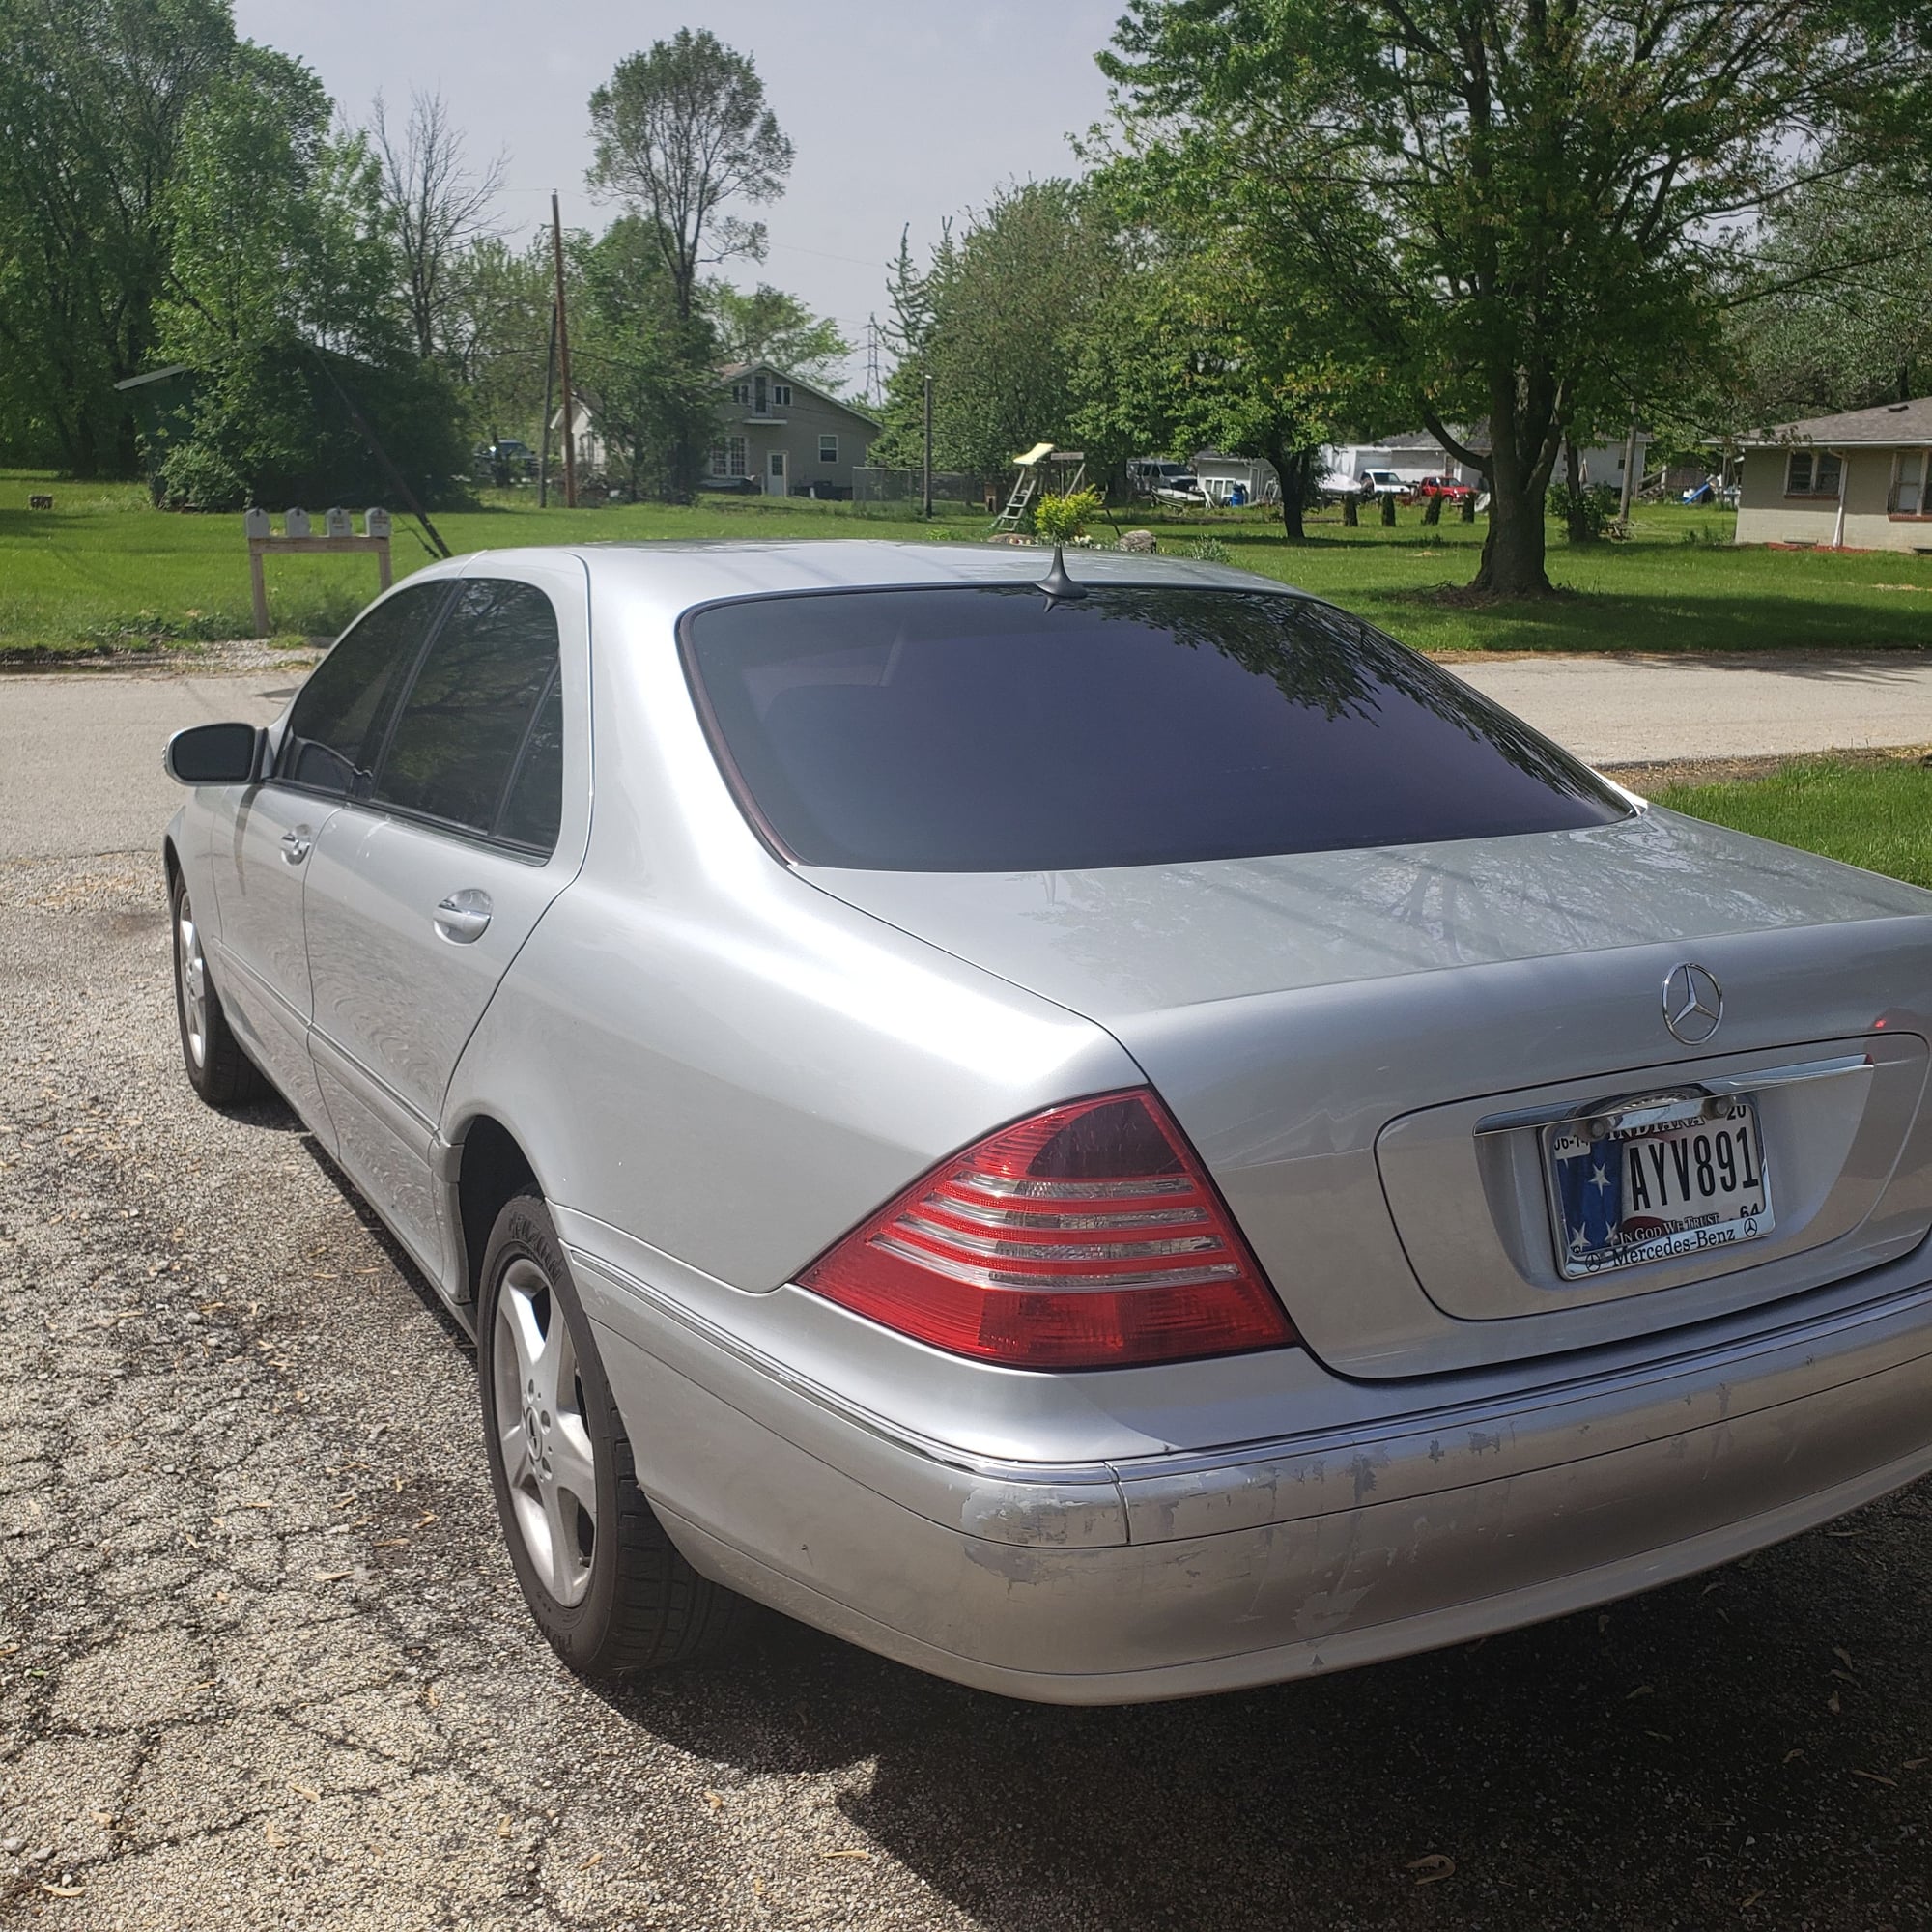 2004 Mercedes-Benz S430 - EXCEPTIONAL LOW MILEAGE 2004 S430 MANY UPGRADES $8,900 ($9,400 w/extras listed below) - Used - VIN WDBNG70JX4A392857 - 72,289 Miles - 8 cyl - 2WD - Automatic - Sedan - Silver - Joliet, IL 60436, United States